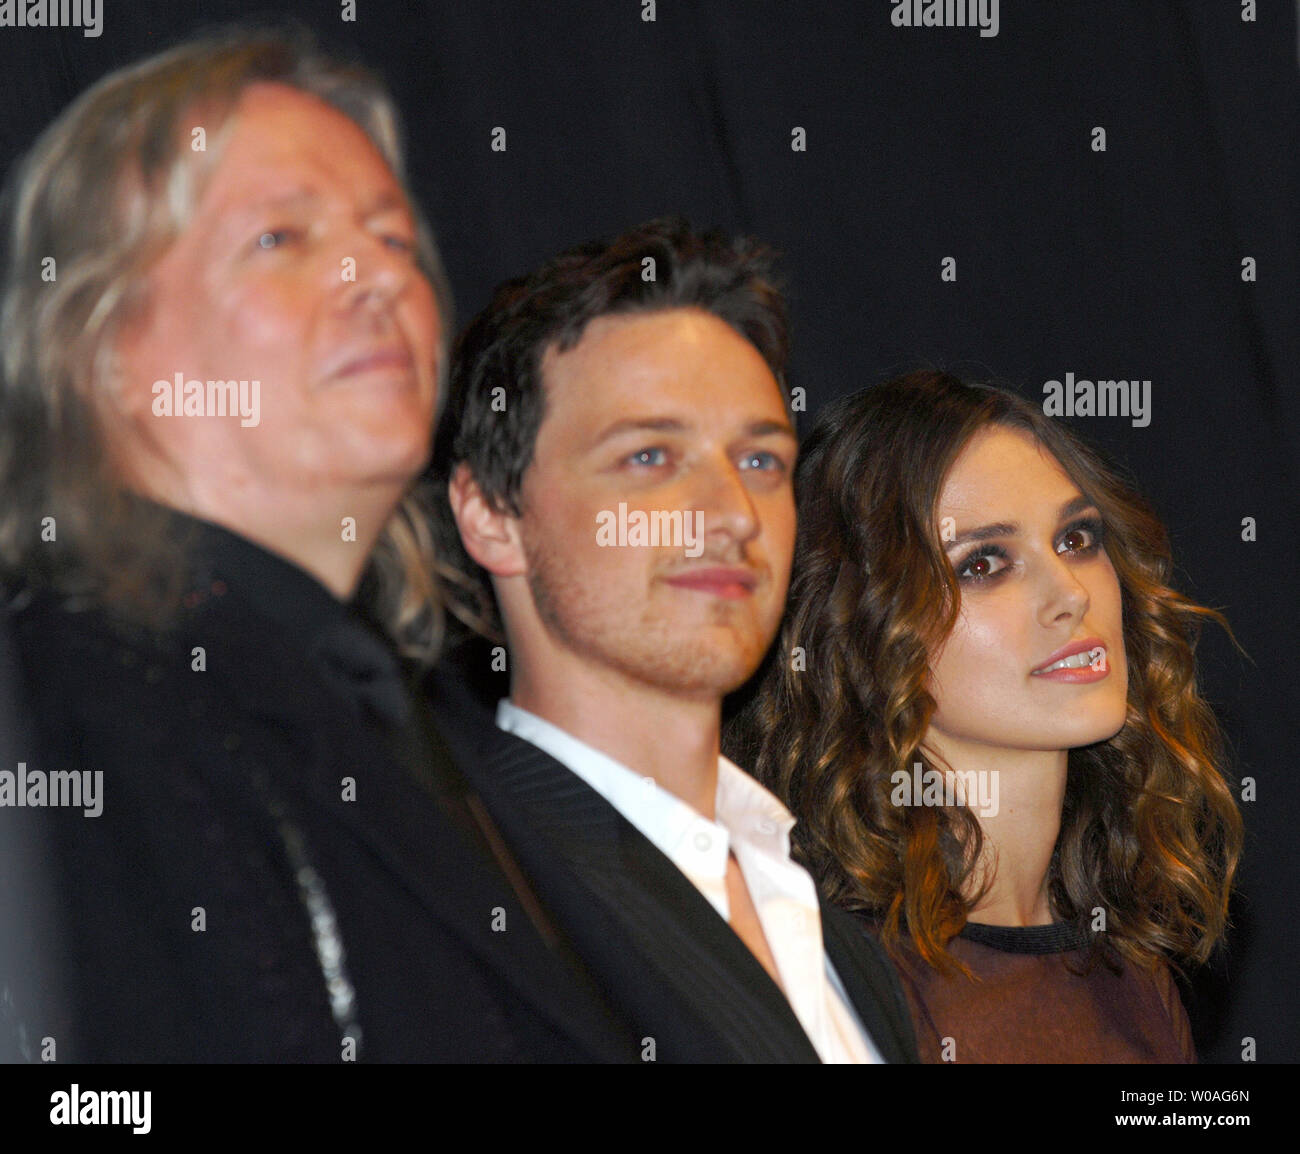 (R-L) Keira Knightley, James McAvoy and screenplay writer Christopher Hampton listen as director Joe Wright introduces the cast onstage at the Toronto International Film Festival premiere of 'Atonement' at the Elgin Theater in Toronto, Canada on September 10, 2007. (UPI Photo/Christine Chew) Stock Photo